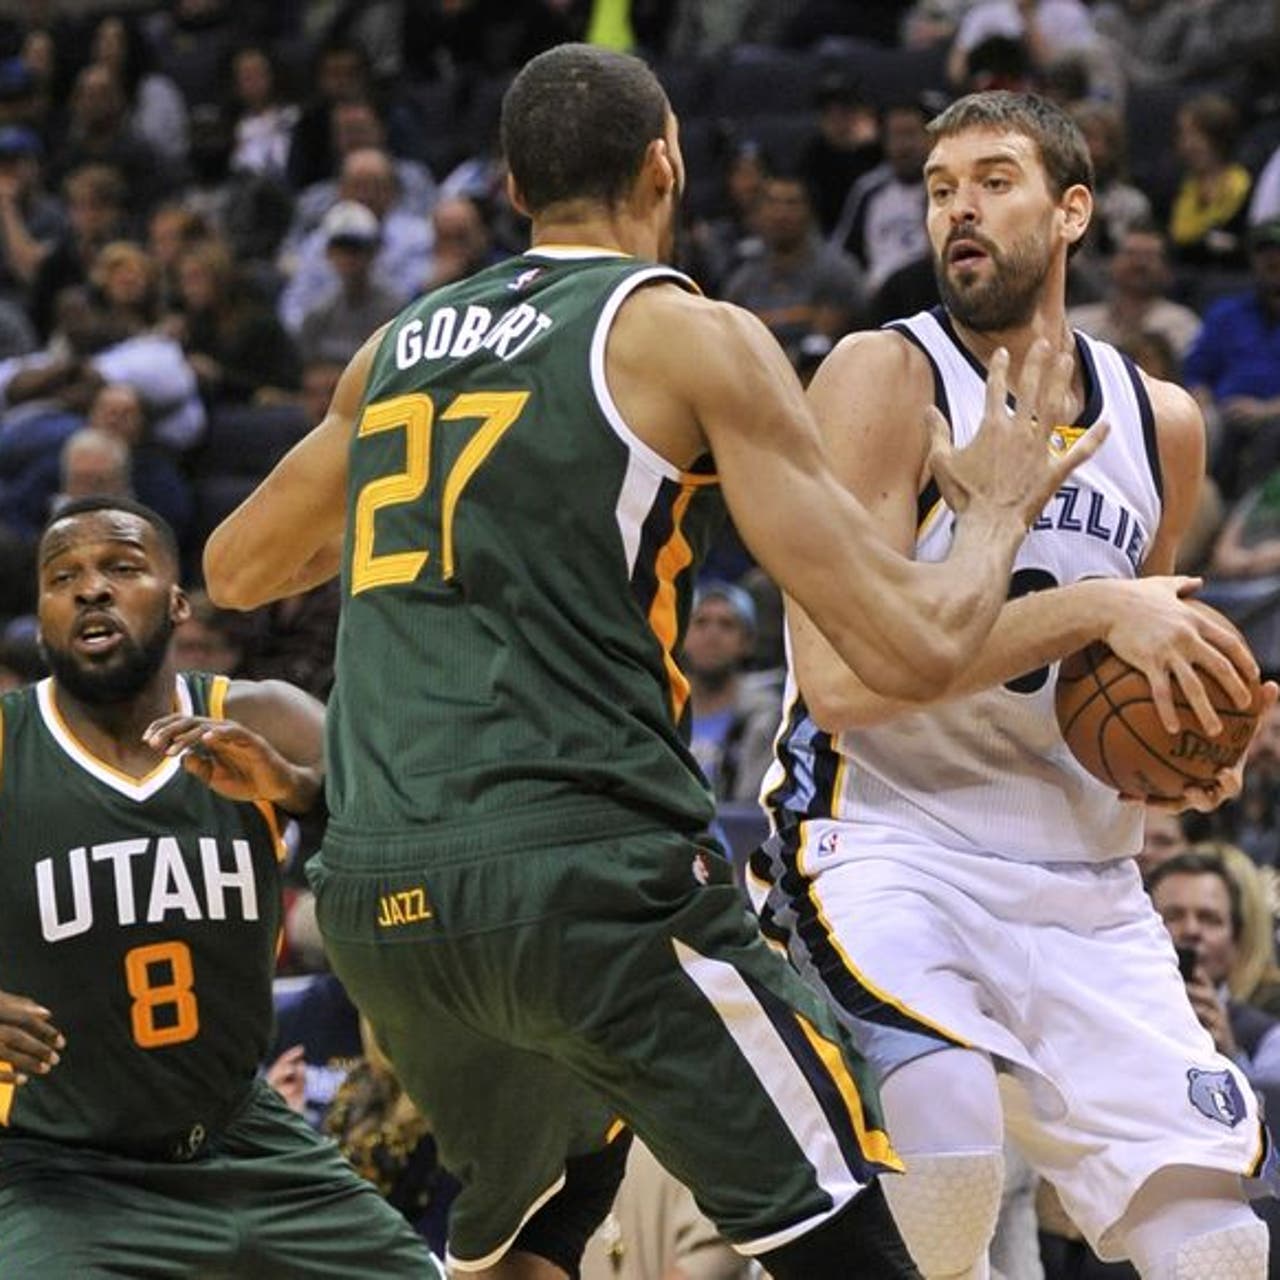 Grizzlies-Jazz Was the Coolest Jersey Matchup in Recent NBA